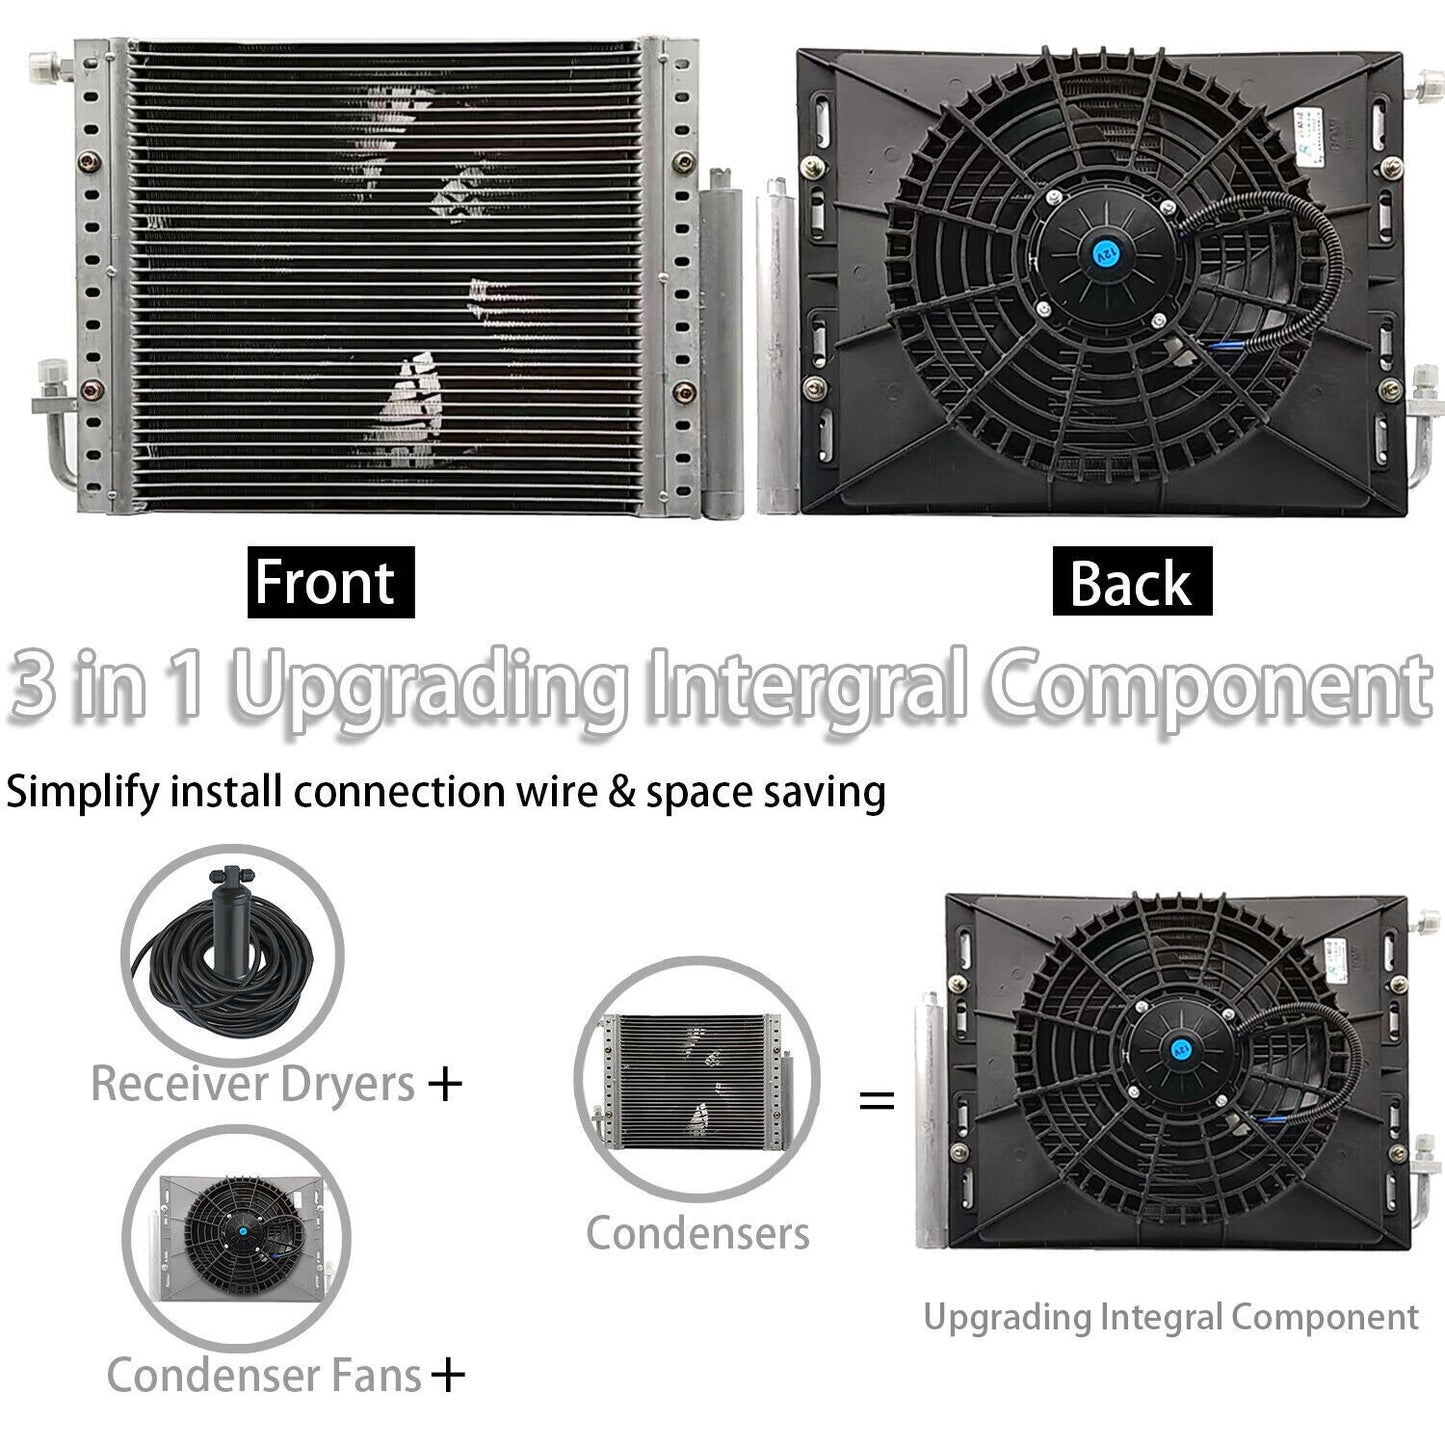 12V Universal Electric Under Dash Air Conditioning A/C Evaporator Kit For Car